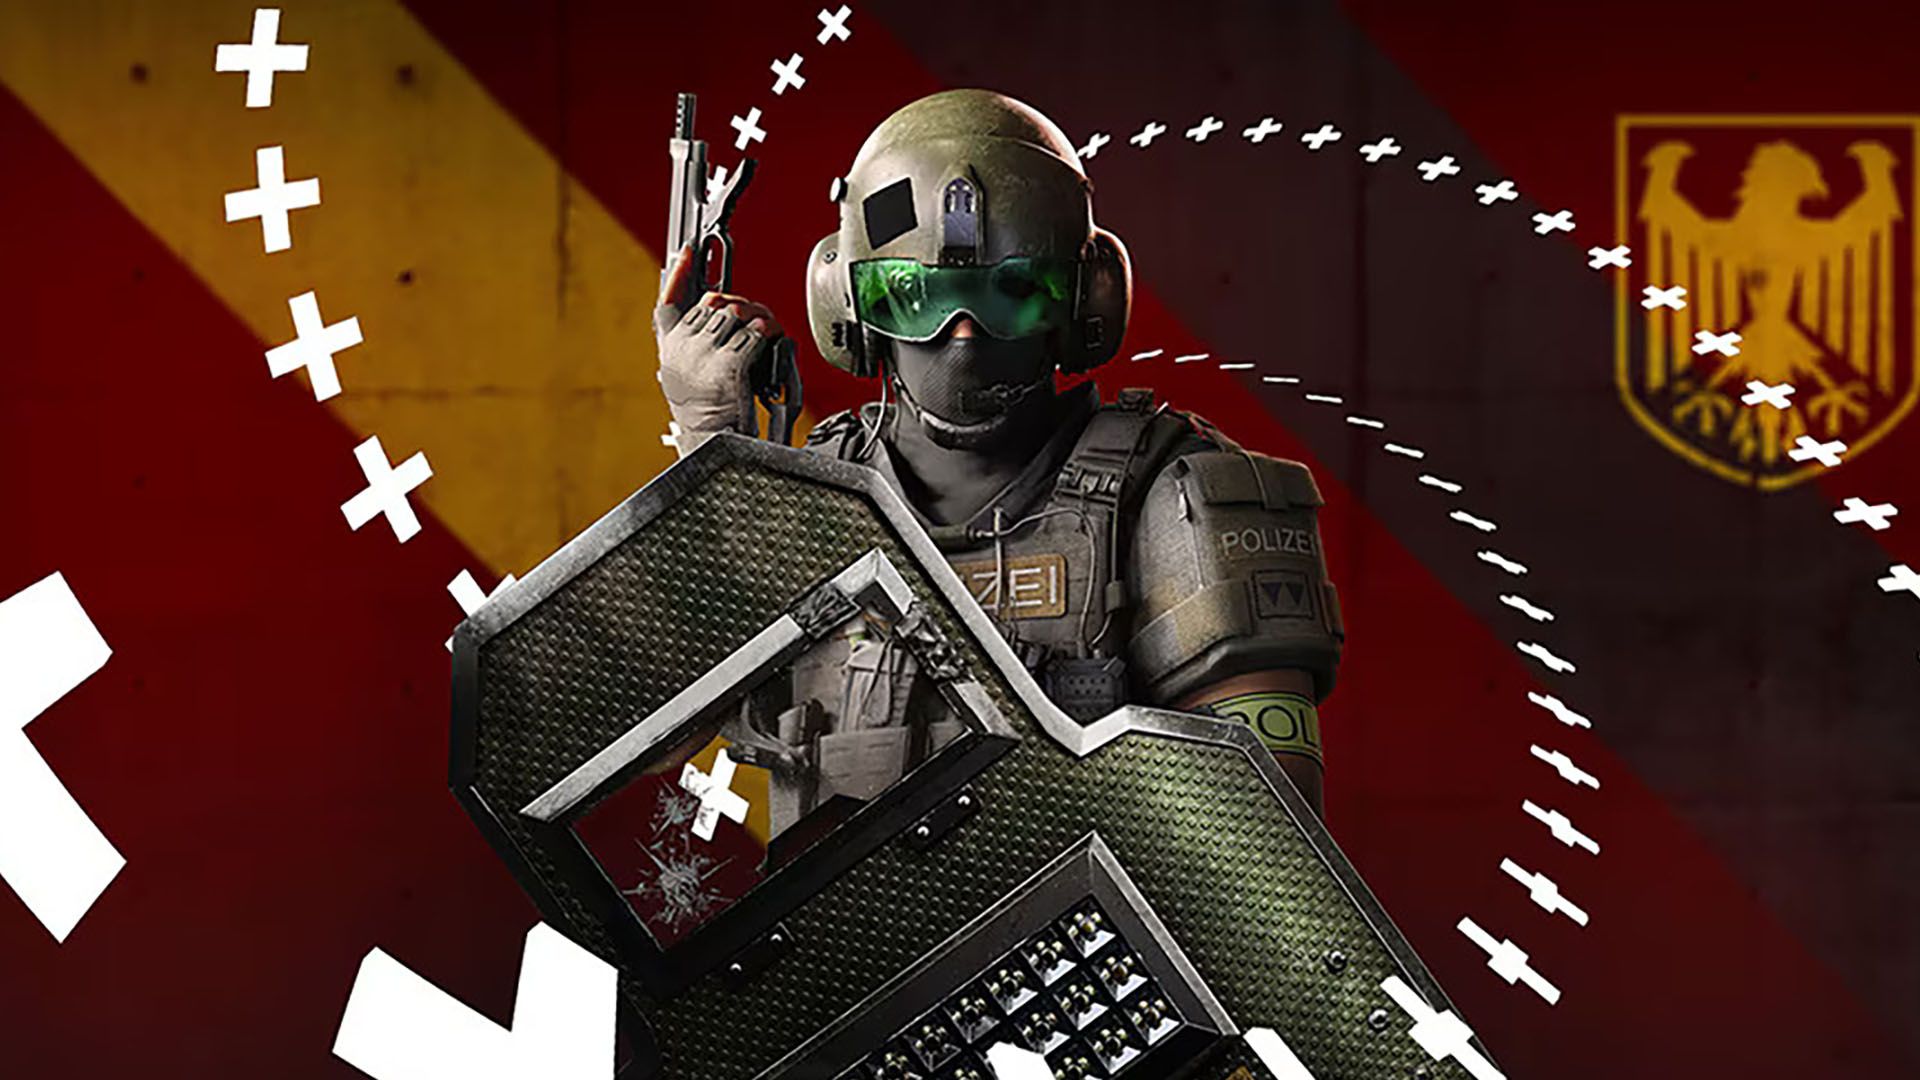 Image of XDefiant GSK faction character holding a shield